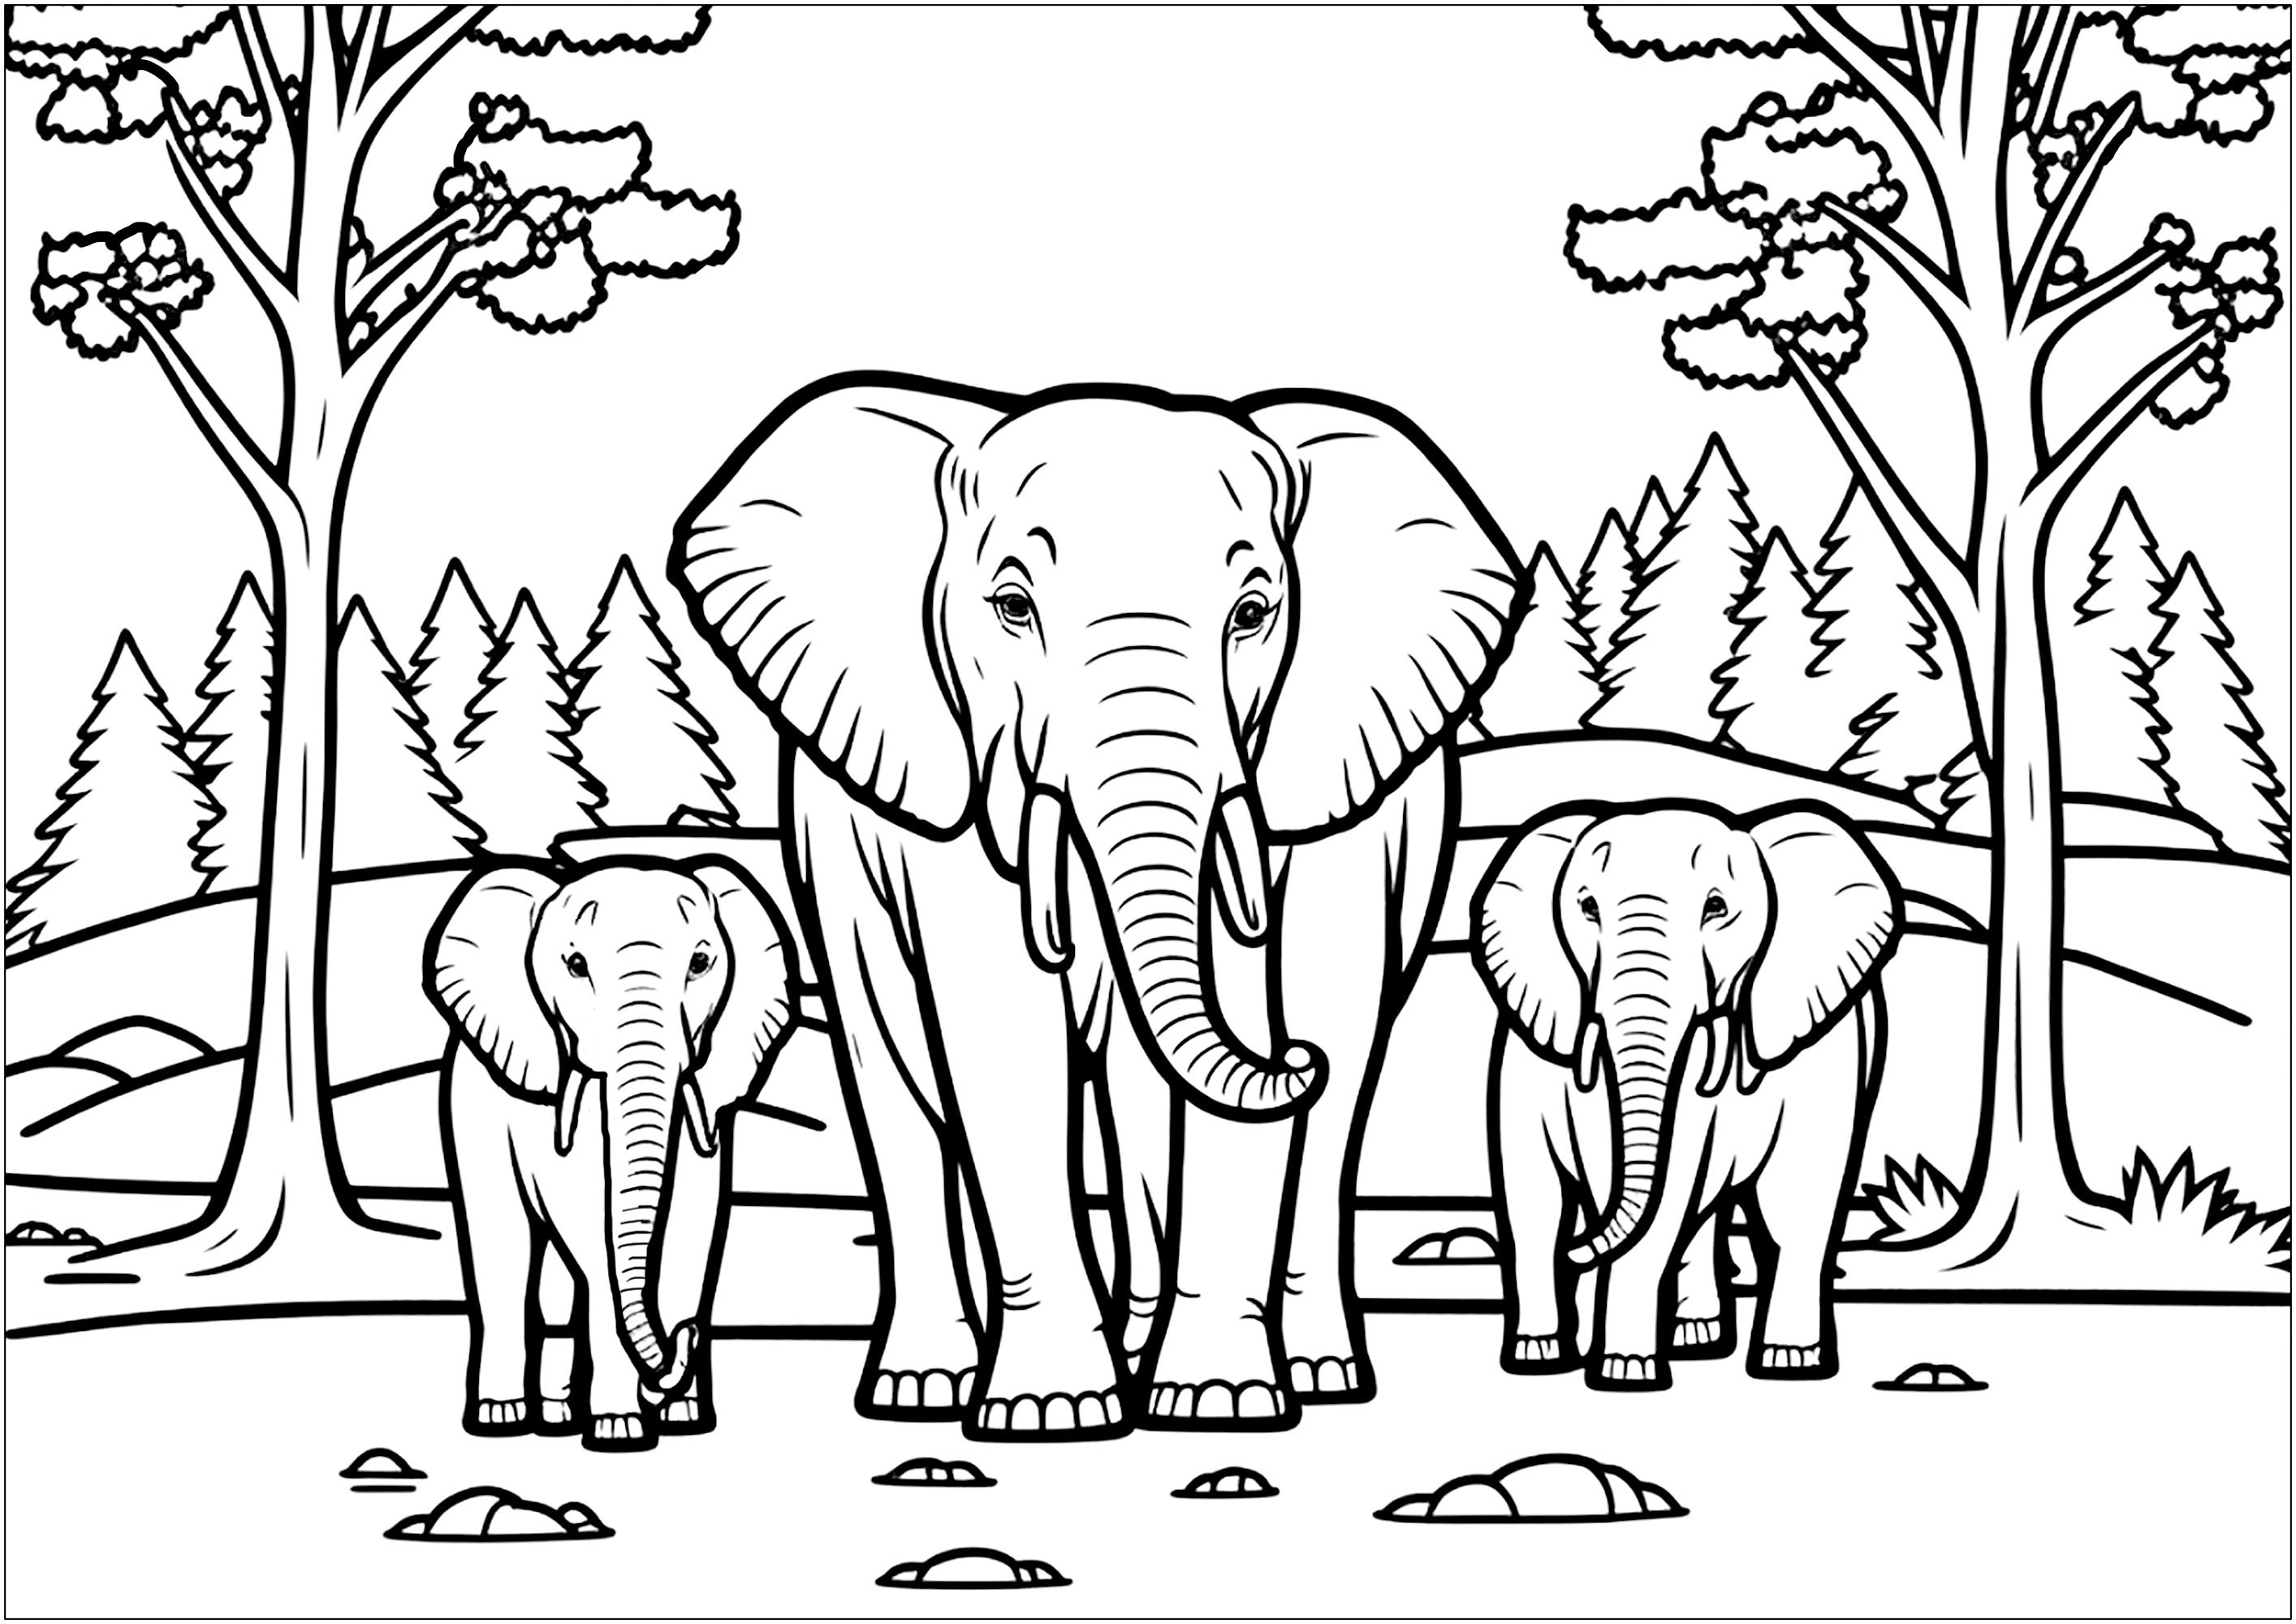 Three elephants in the forest